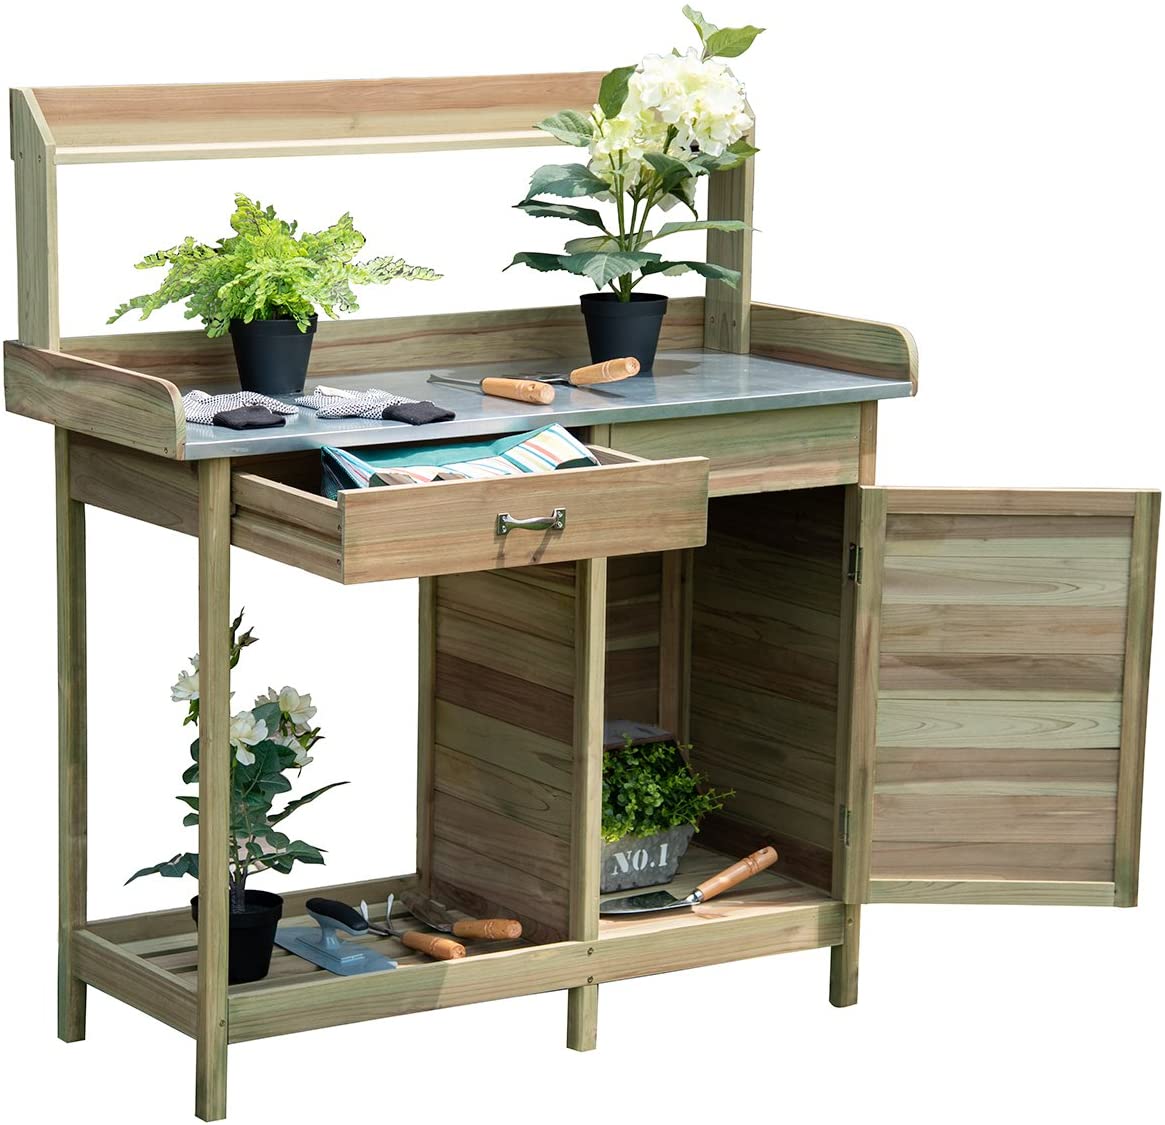 Potting Bench Table for Outside Natural Wood Garden Plant Lawn Patio Table